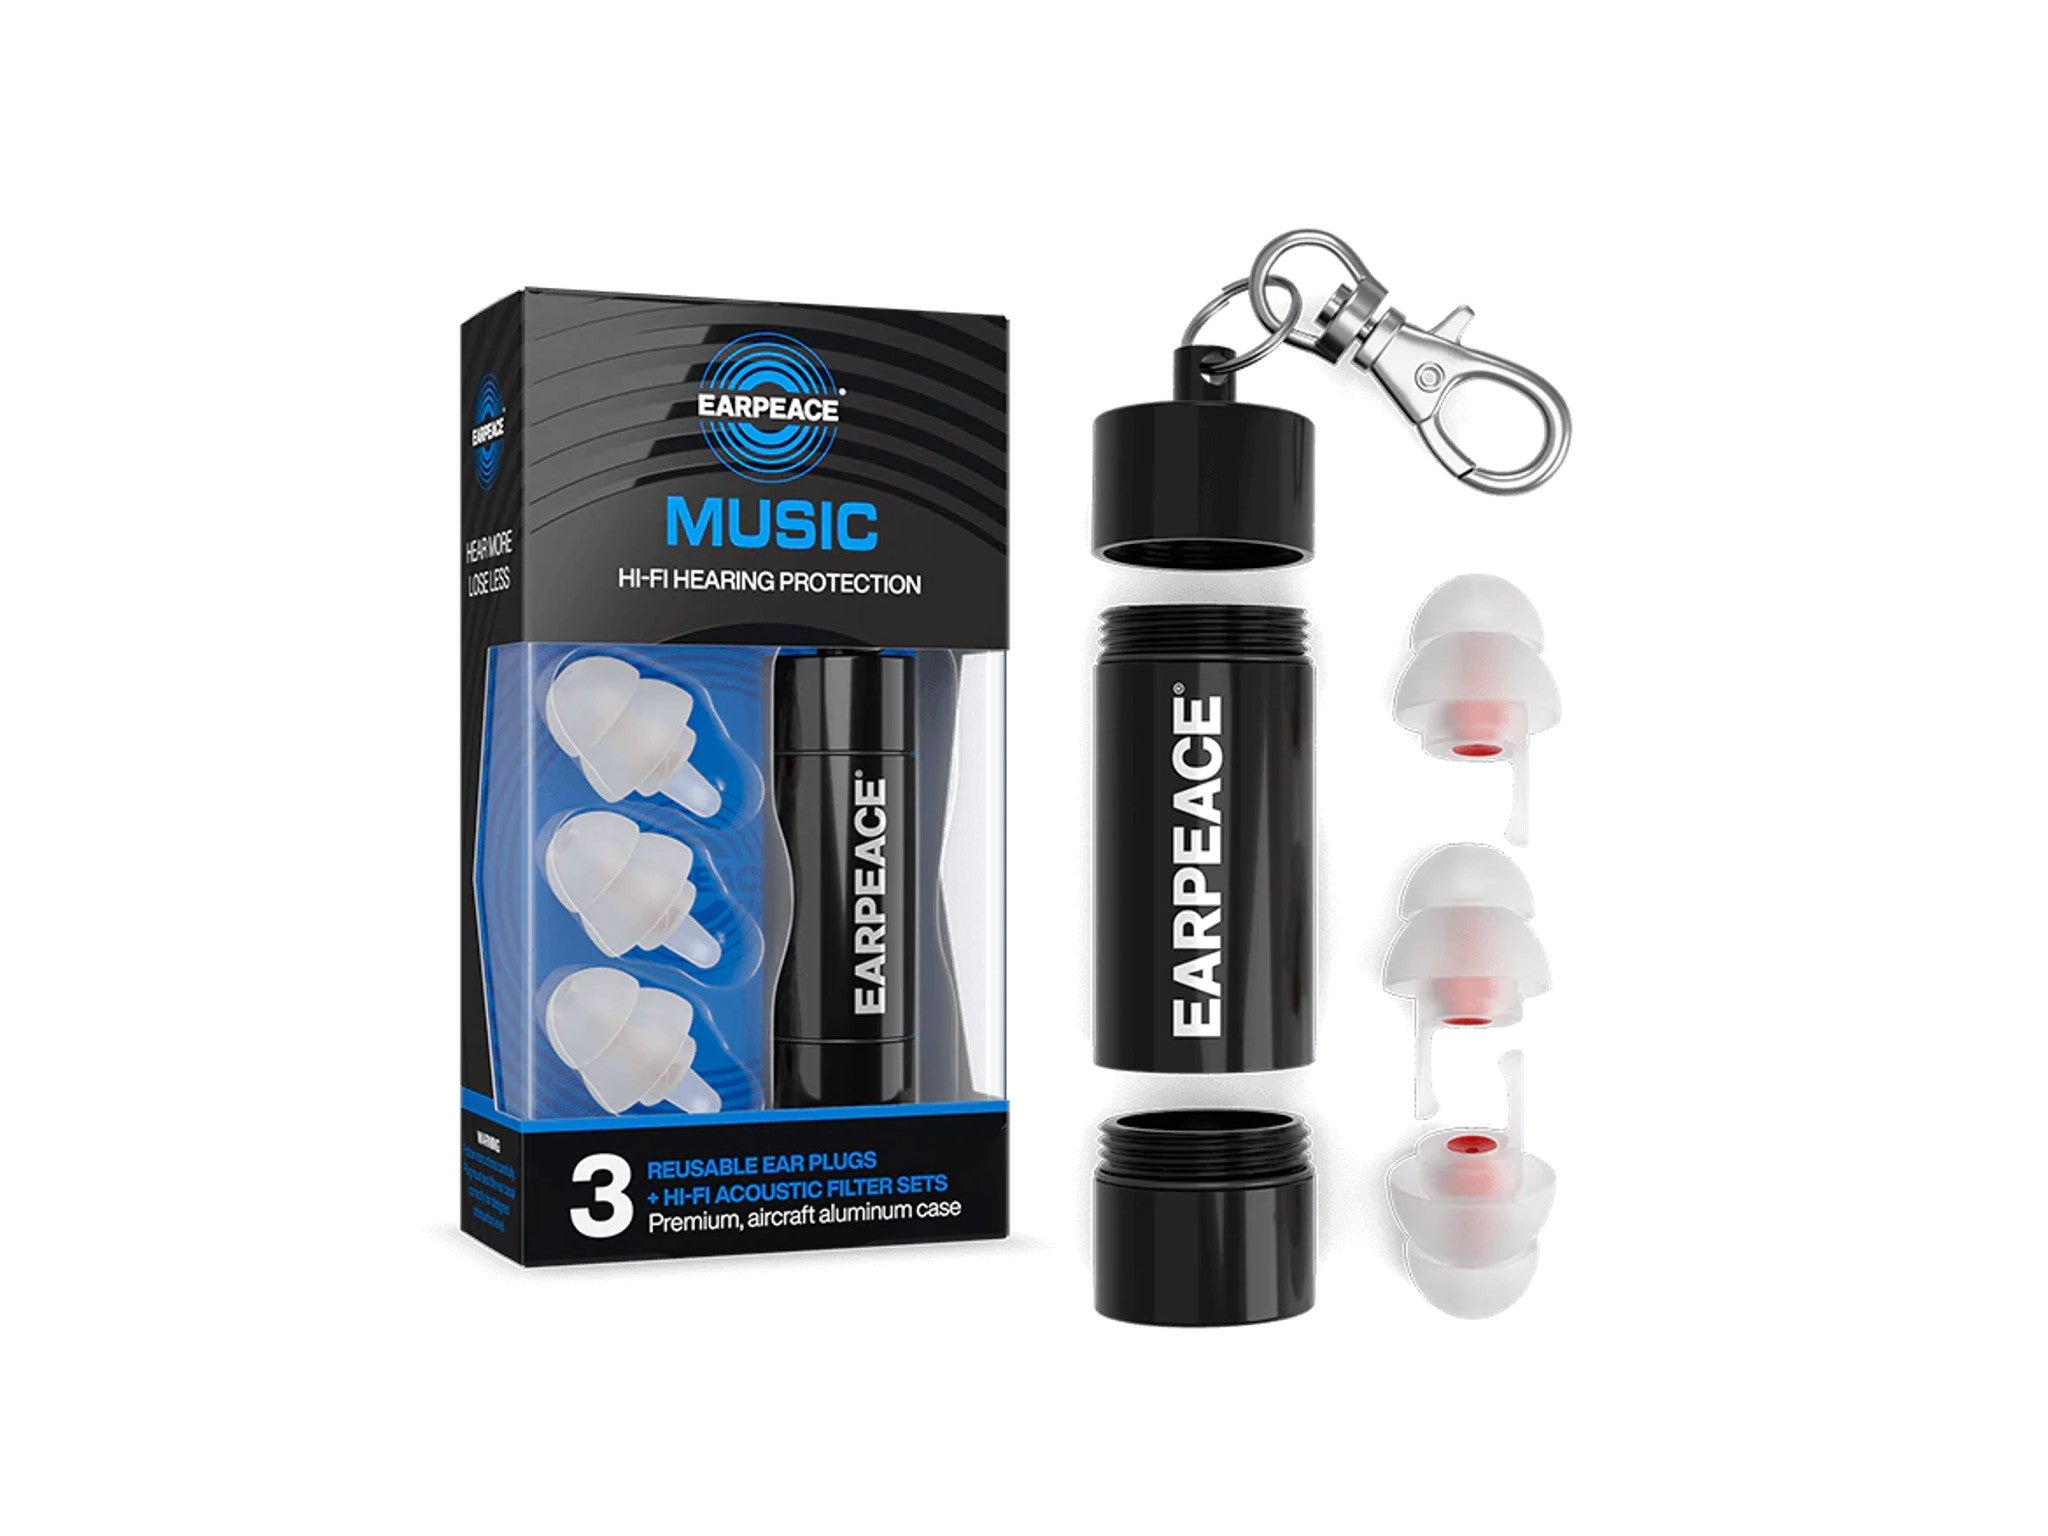 Concerts Sleeping and Festivals DJs Daman High Fidelity,Reusable Ear Plugs Professional Hearing Protection for Noise Cancelling Motocycle Musicians 